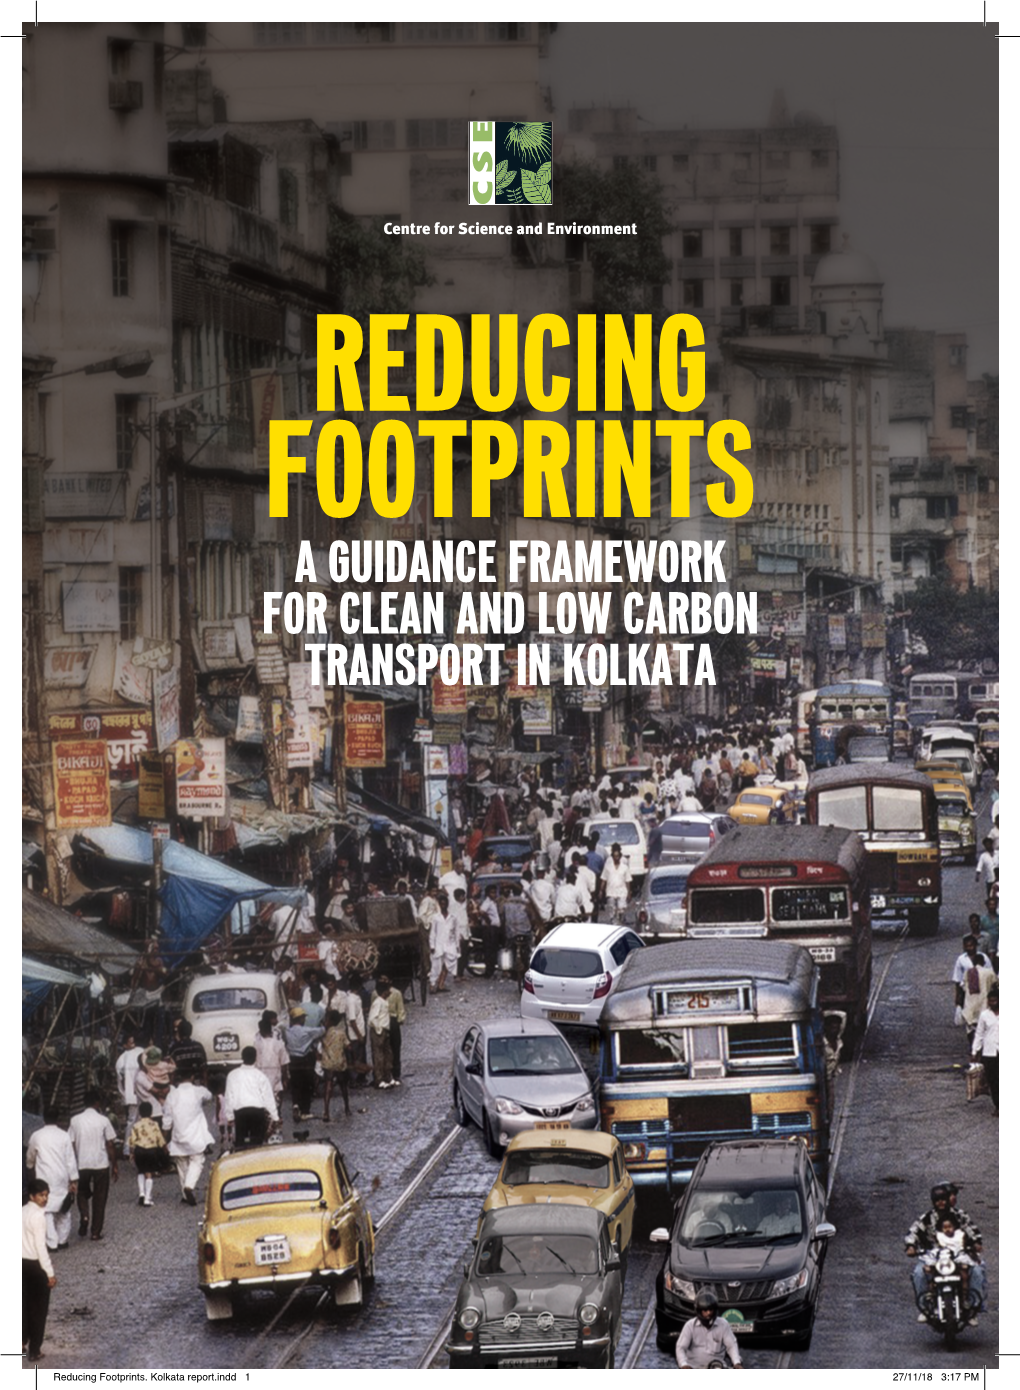 A Guidance Framework for Clean and Low Carbon Transport in Kolkata